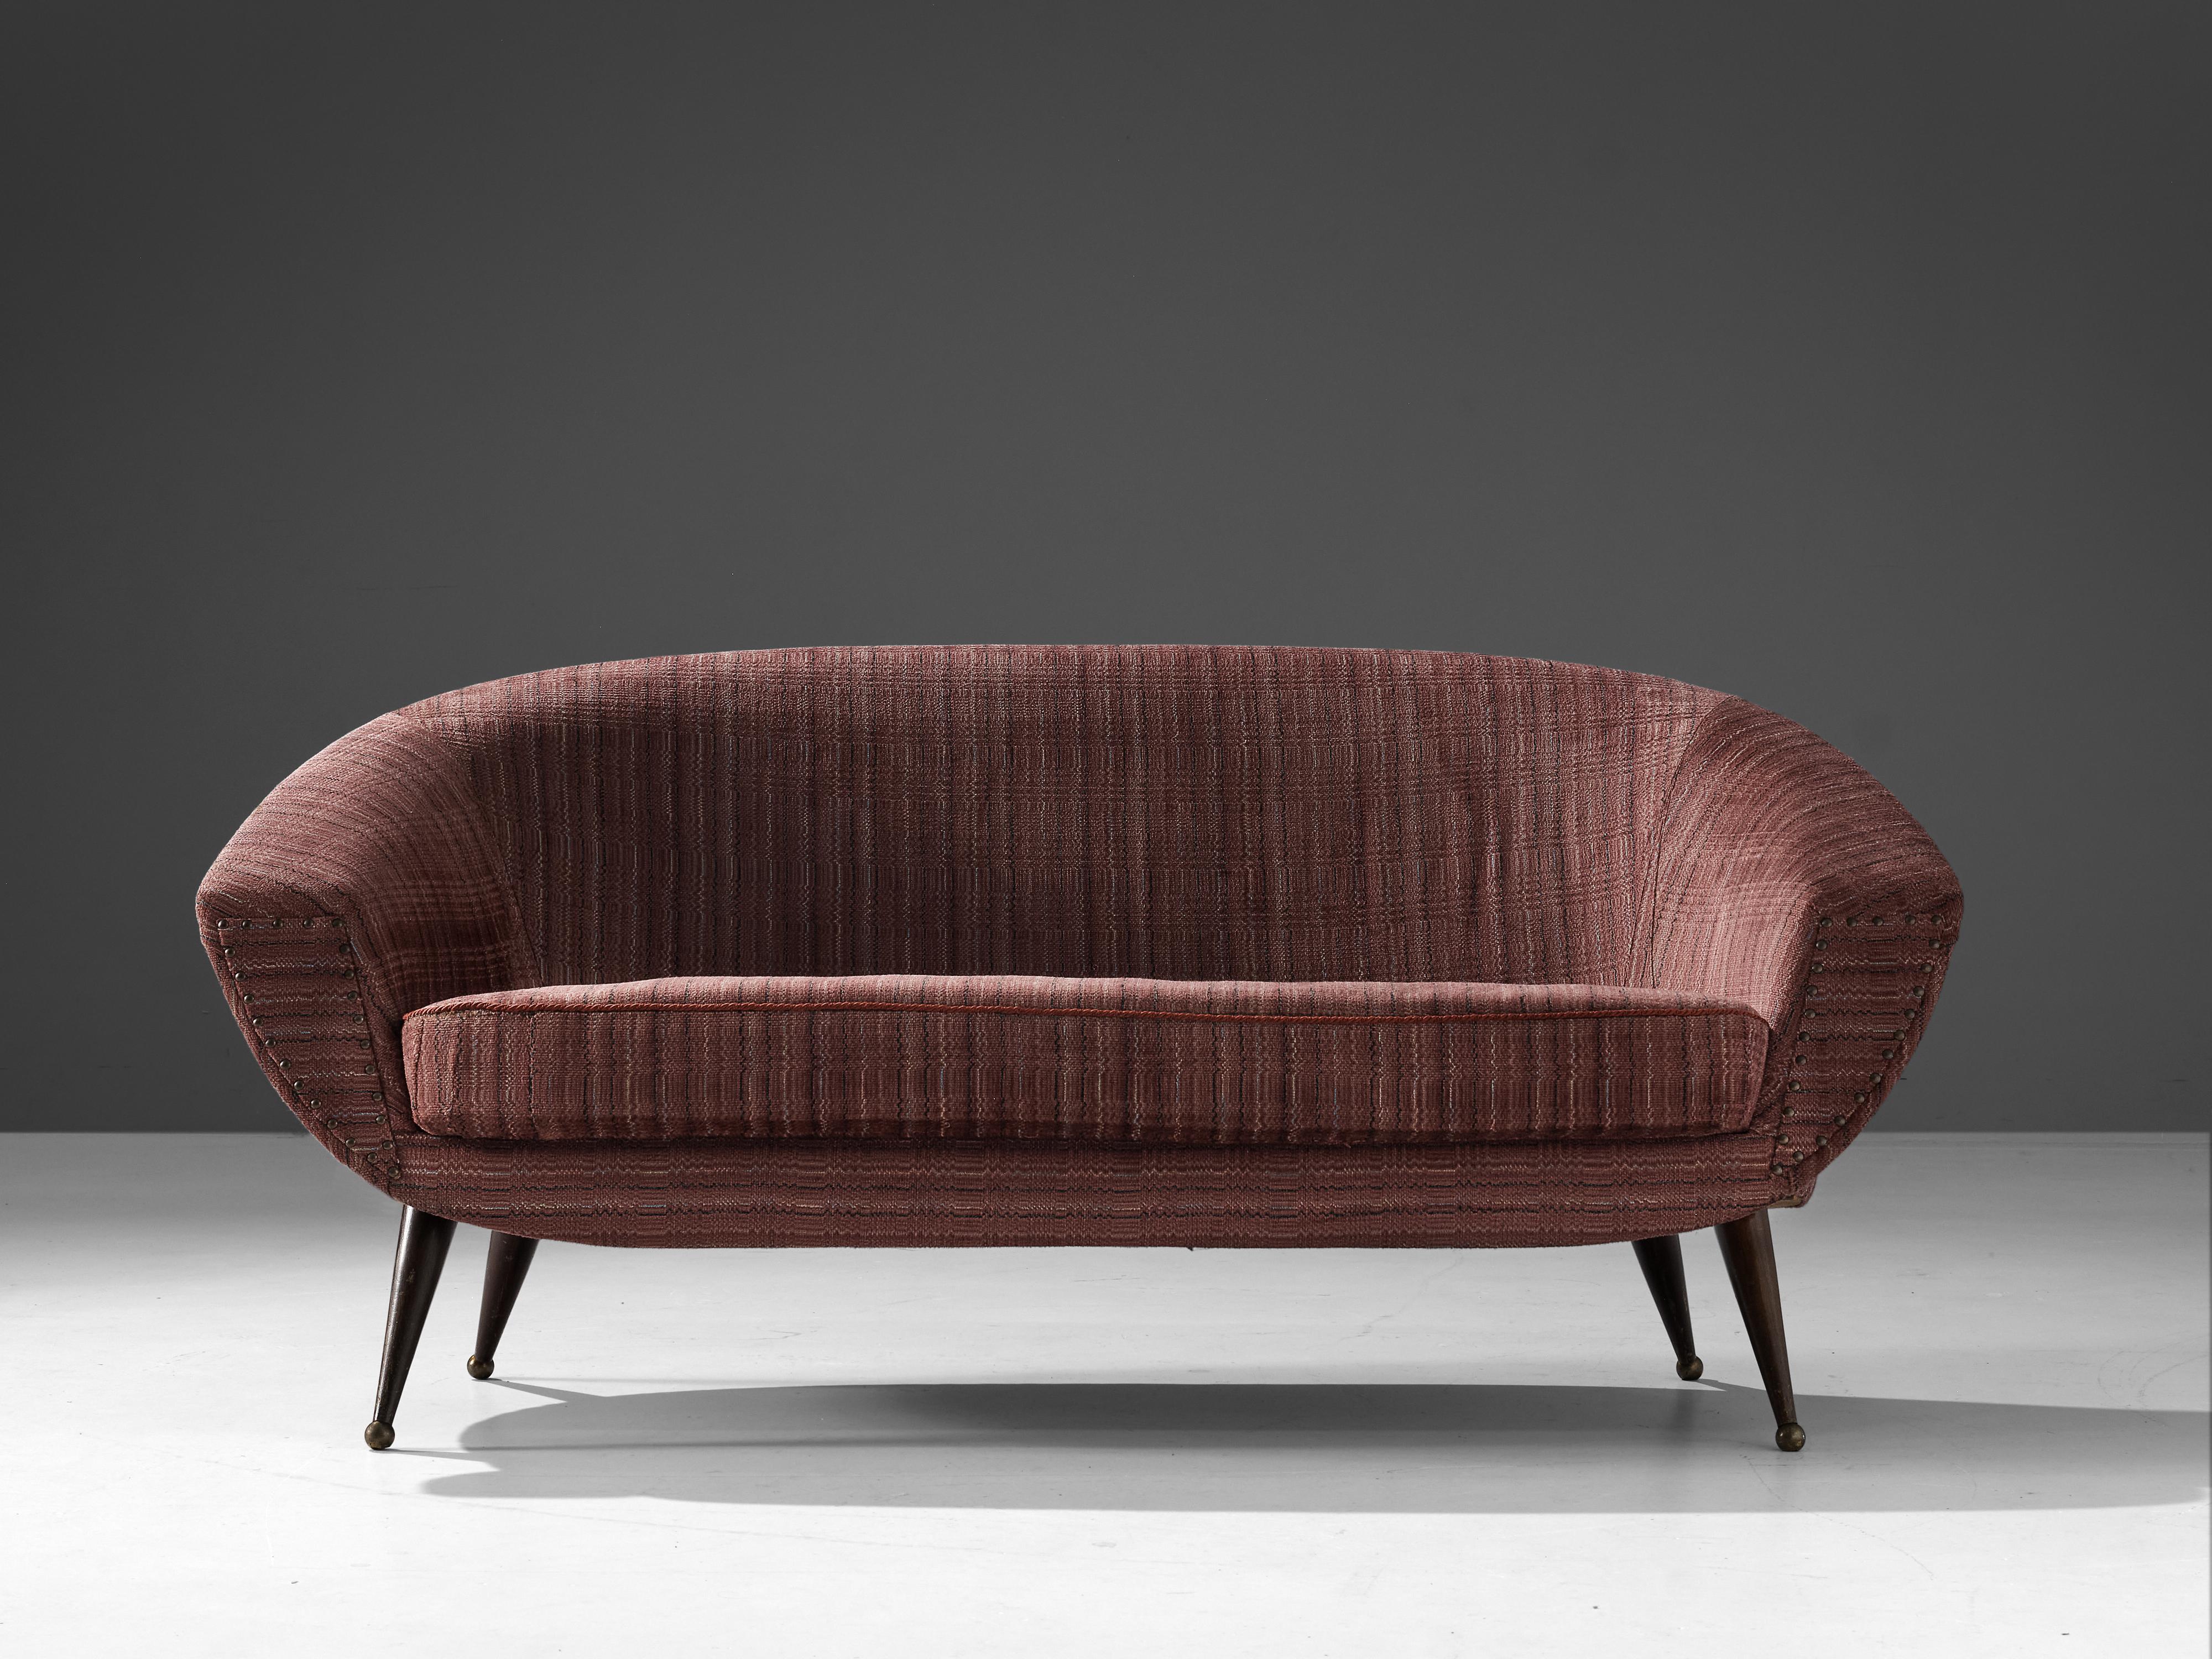 Mid-20th Century Folke Jansson 'Tellus' Sofa in Dusty Rose Upholstery For Sale